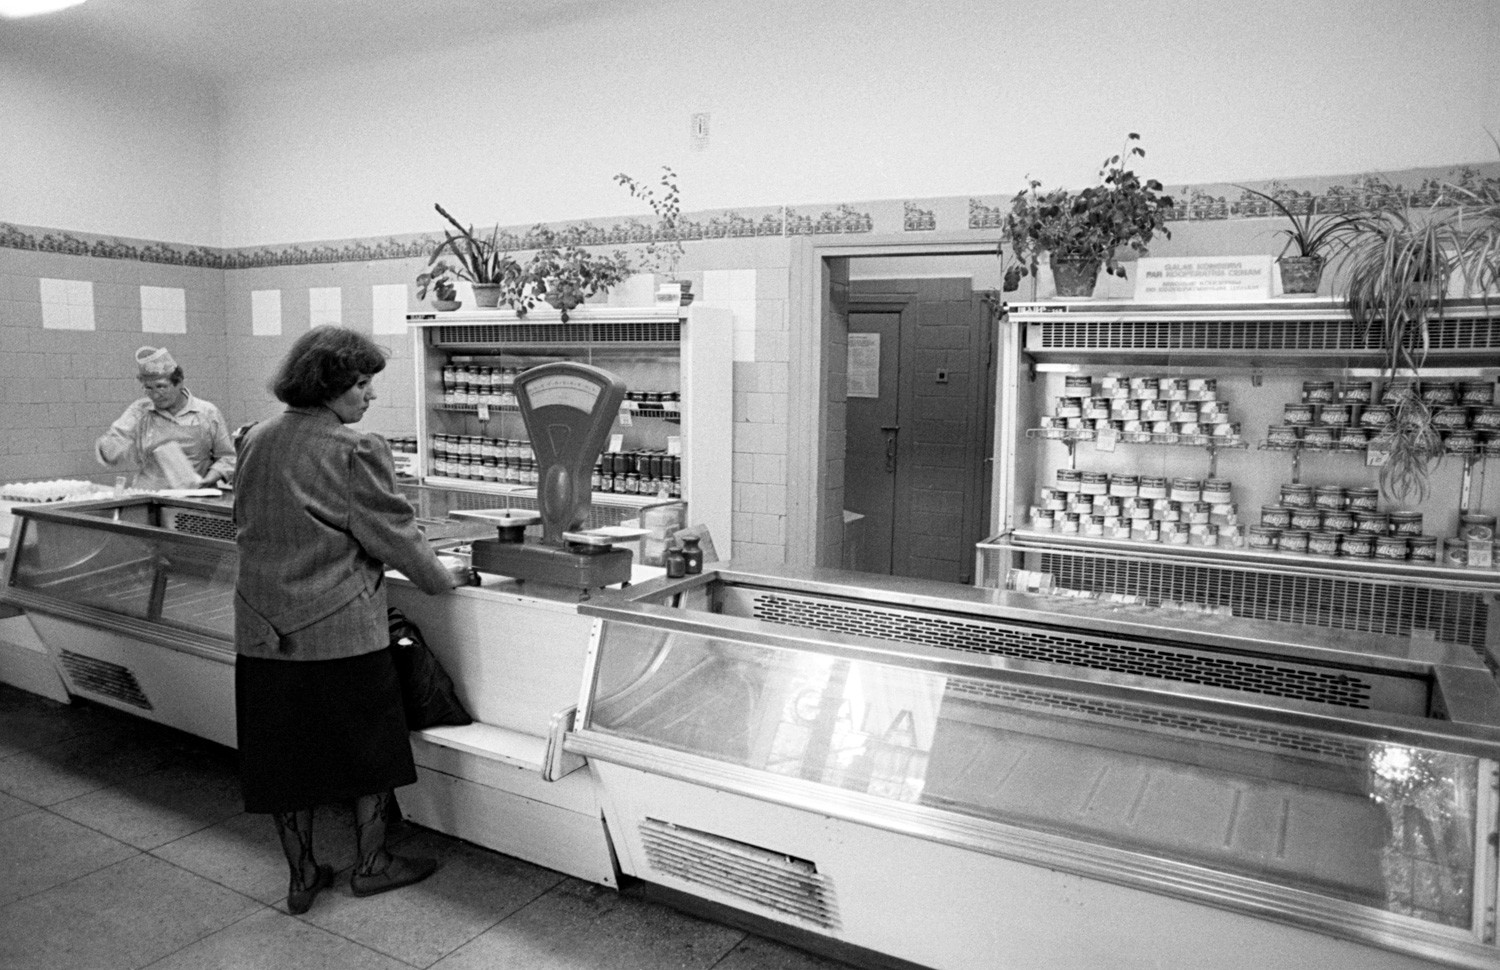 Meat selection in the Soviet Union